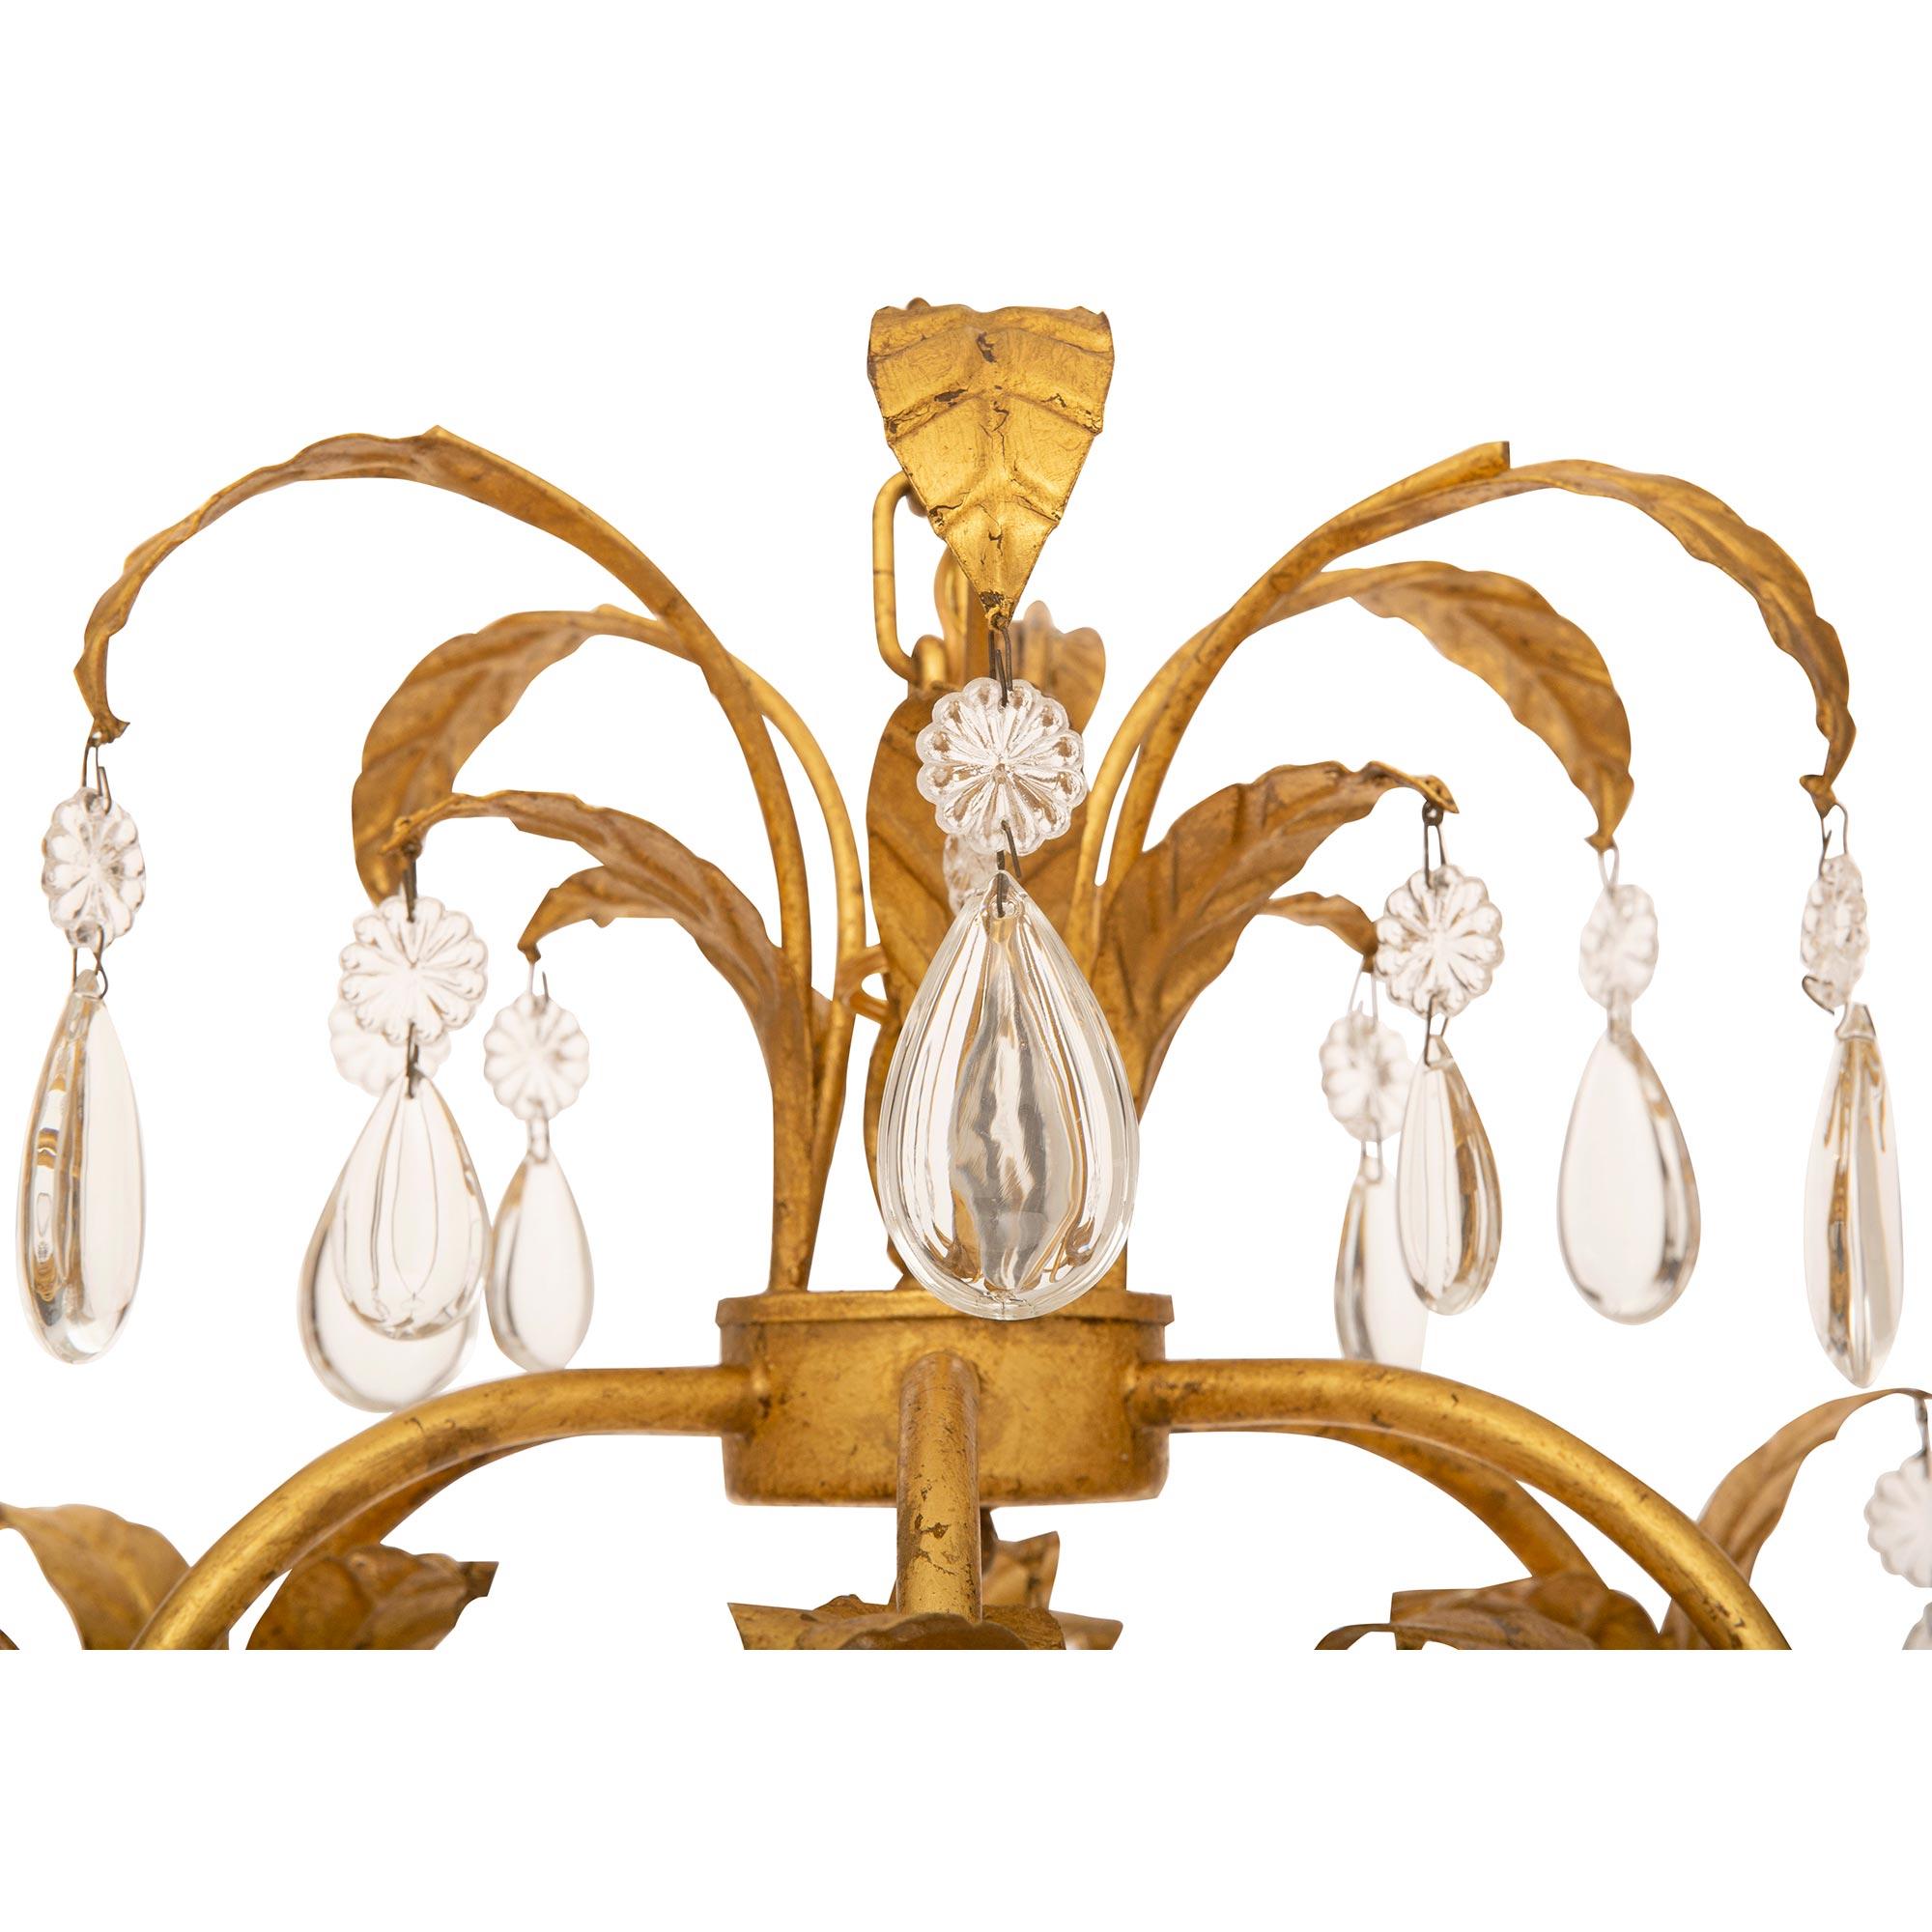  Pair of Italian turn of the cent Louis XV st. gilt metal and cryst chandeliers In Good Condition For Sale In West Palm Beach, FL